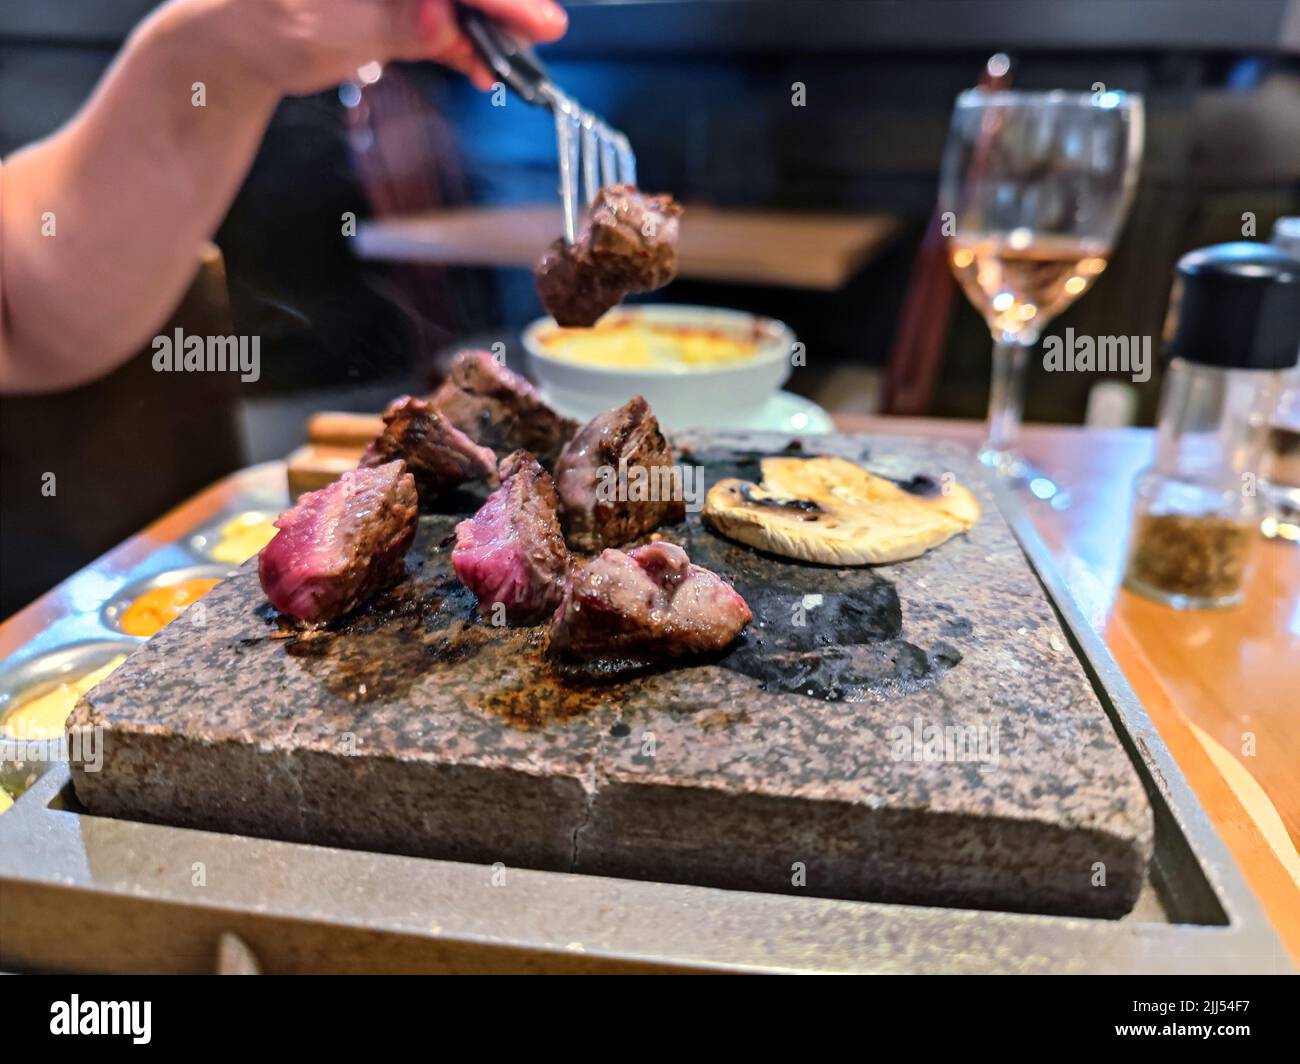 White woman's hand with a fork cooks steak on a stone grill in a restaurant on a dinner table Stock Photo